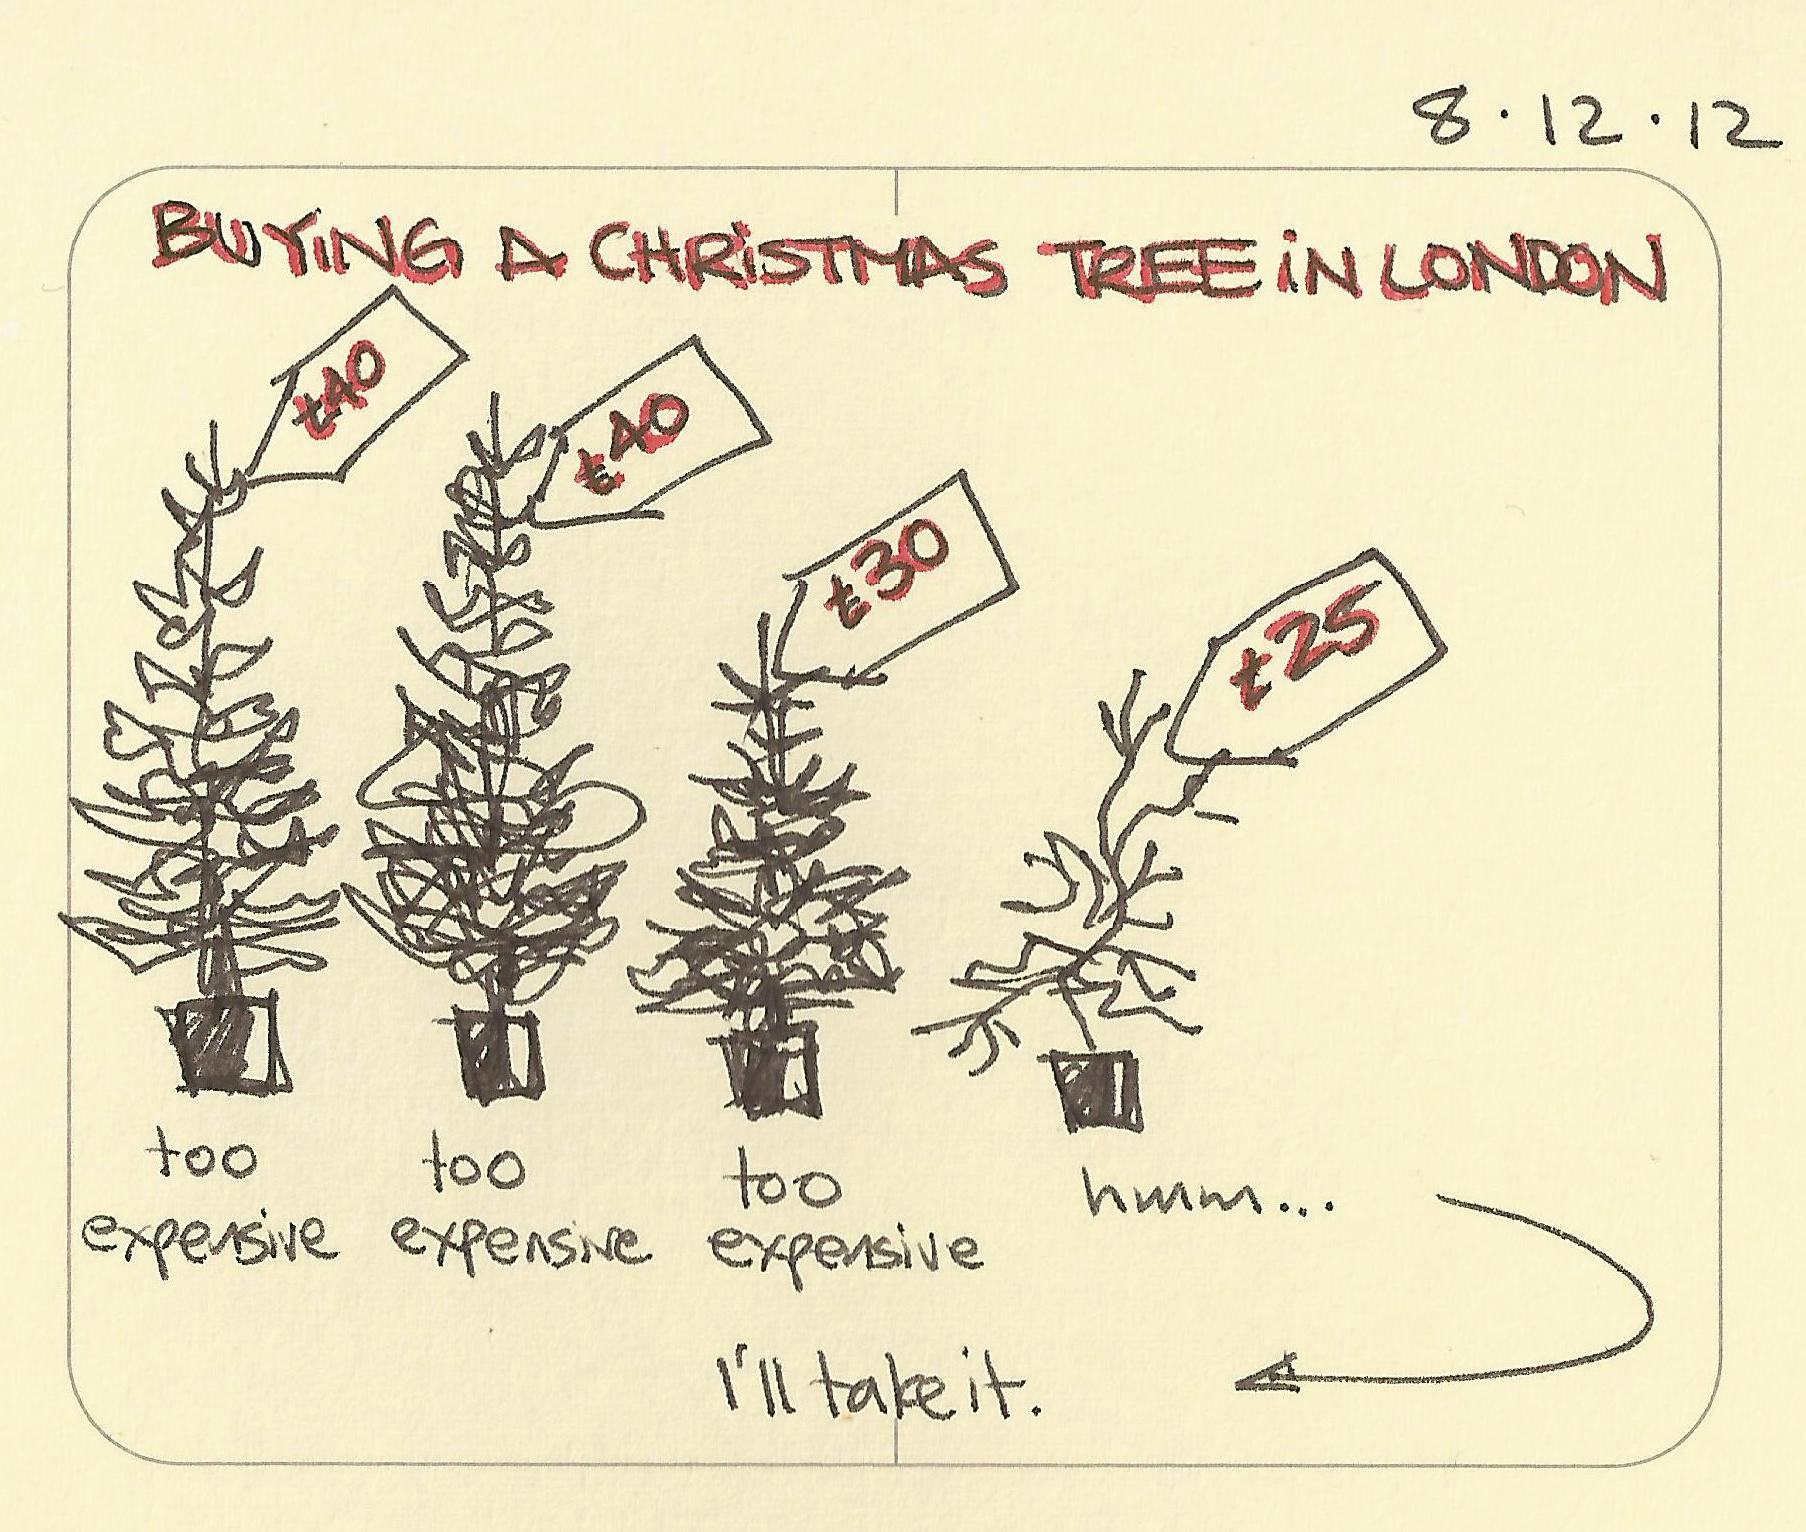 Buying a Christmas tree in London - Sketchplanations